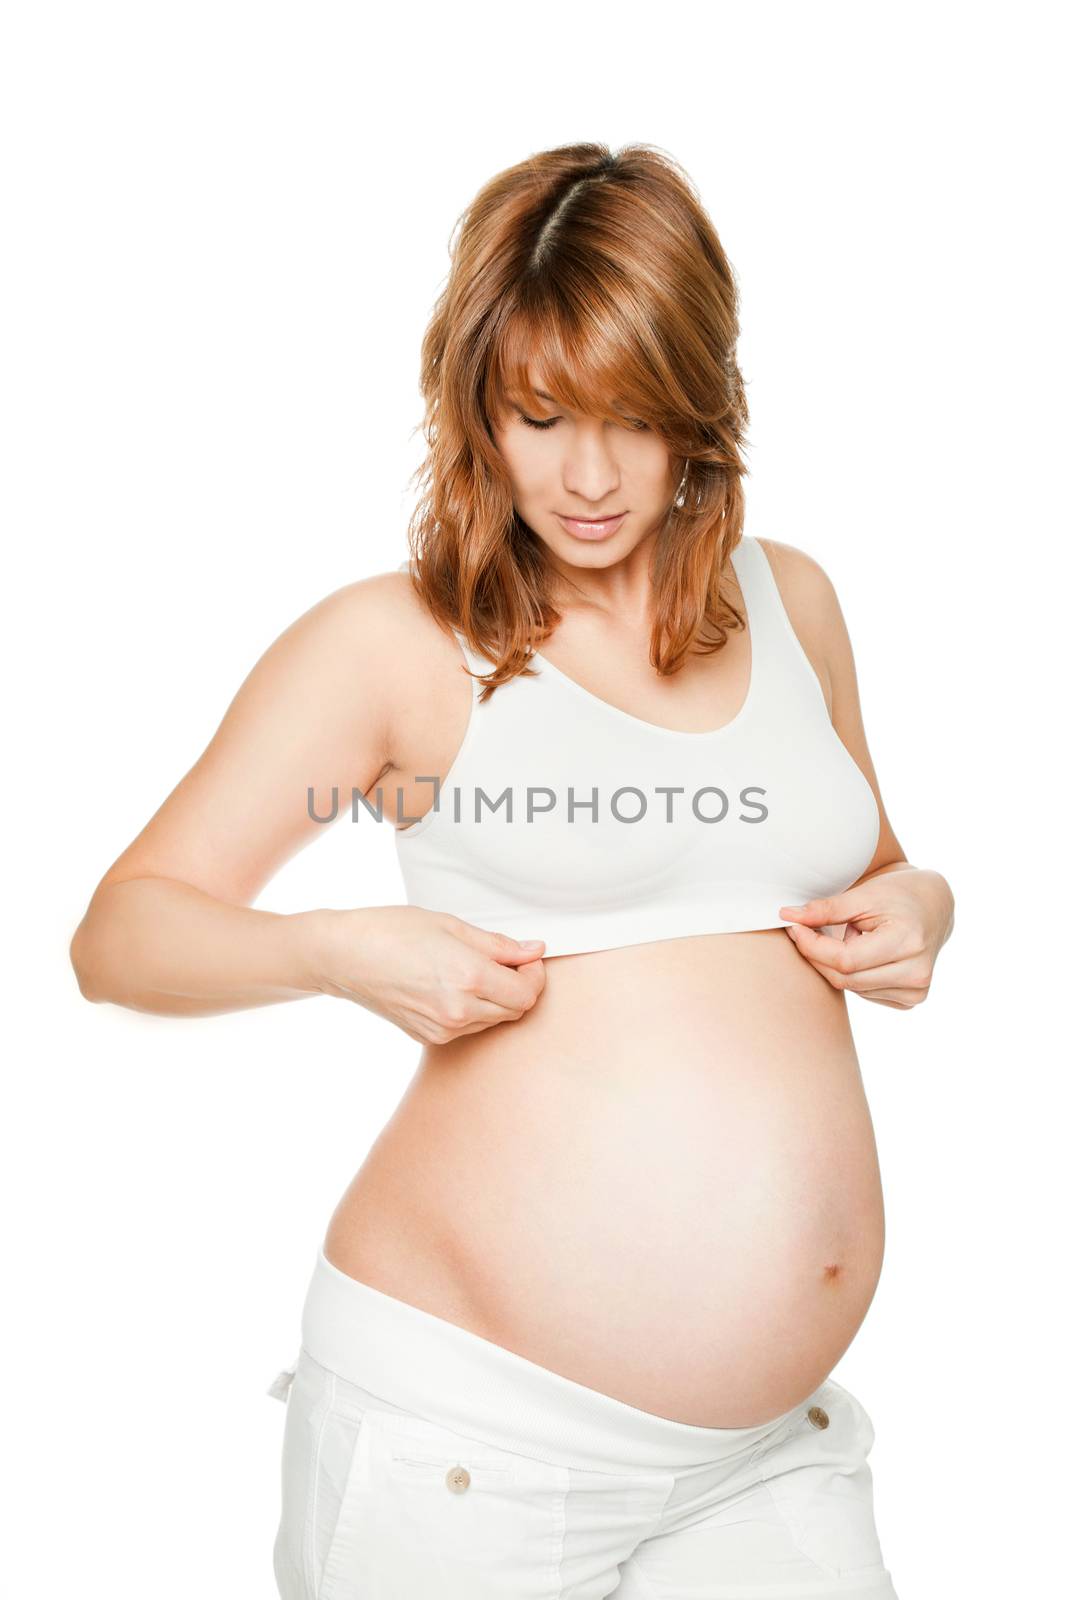 Pregnant woman looking down at bra, isolated on white